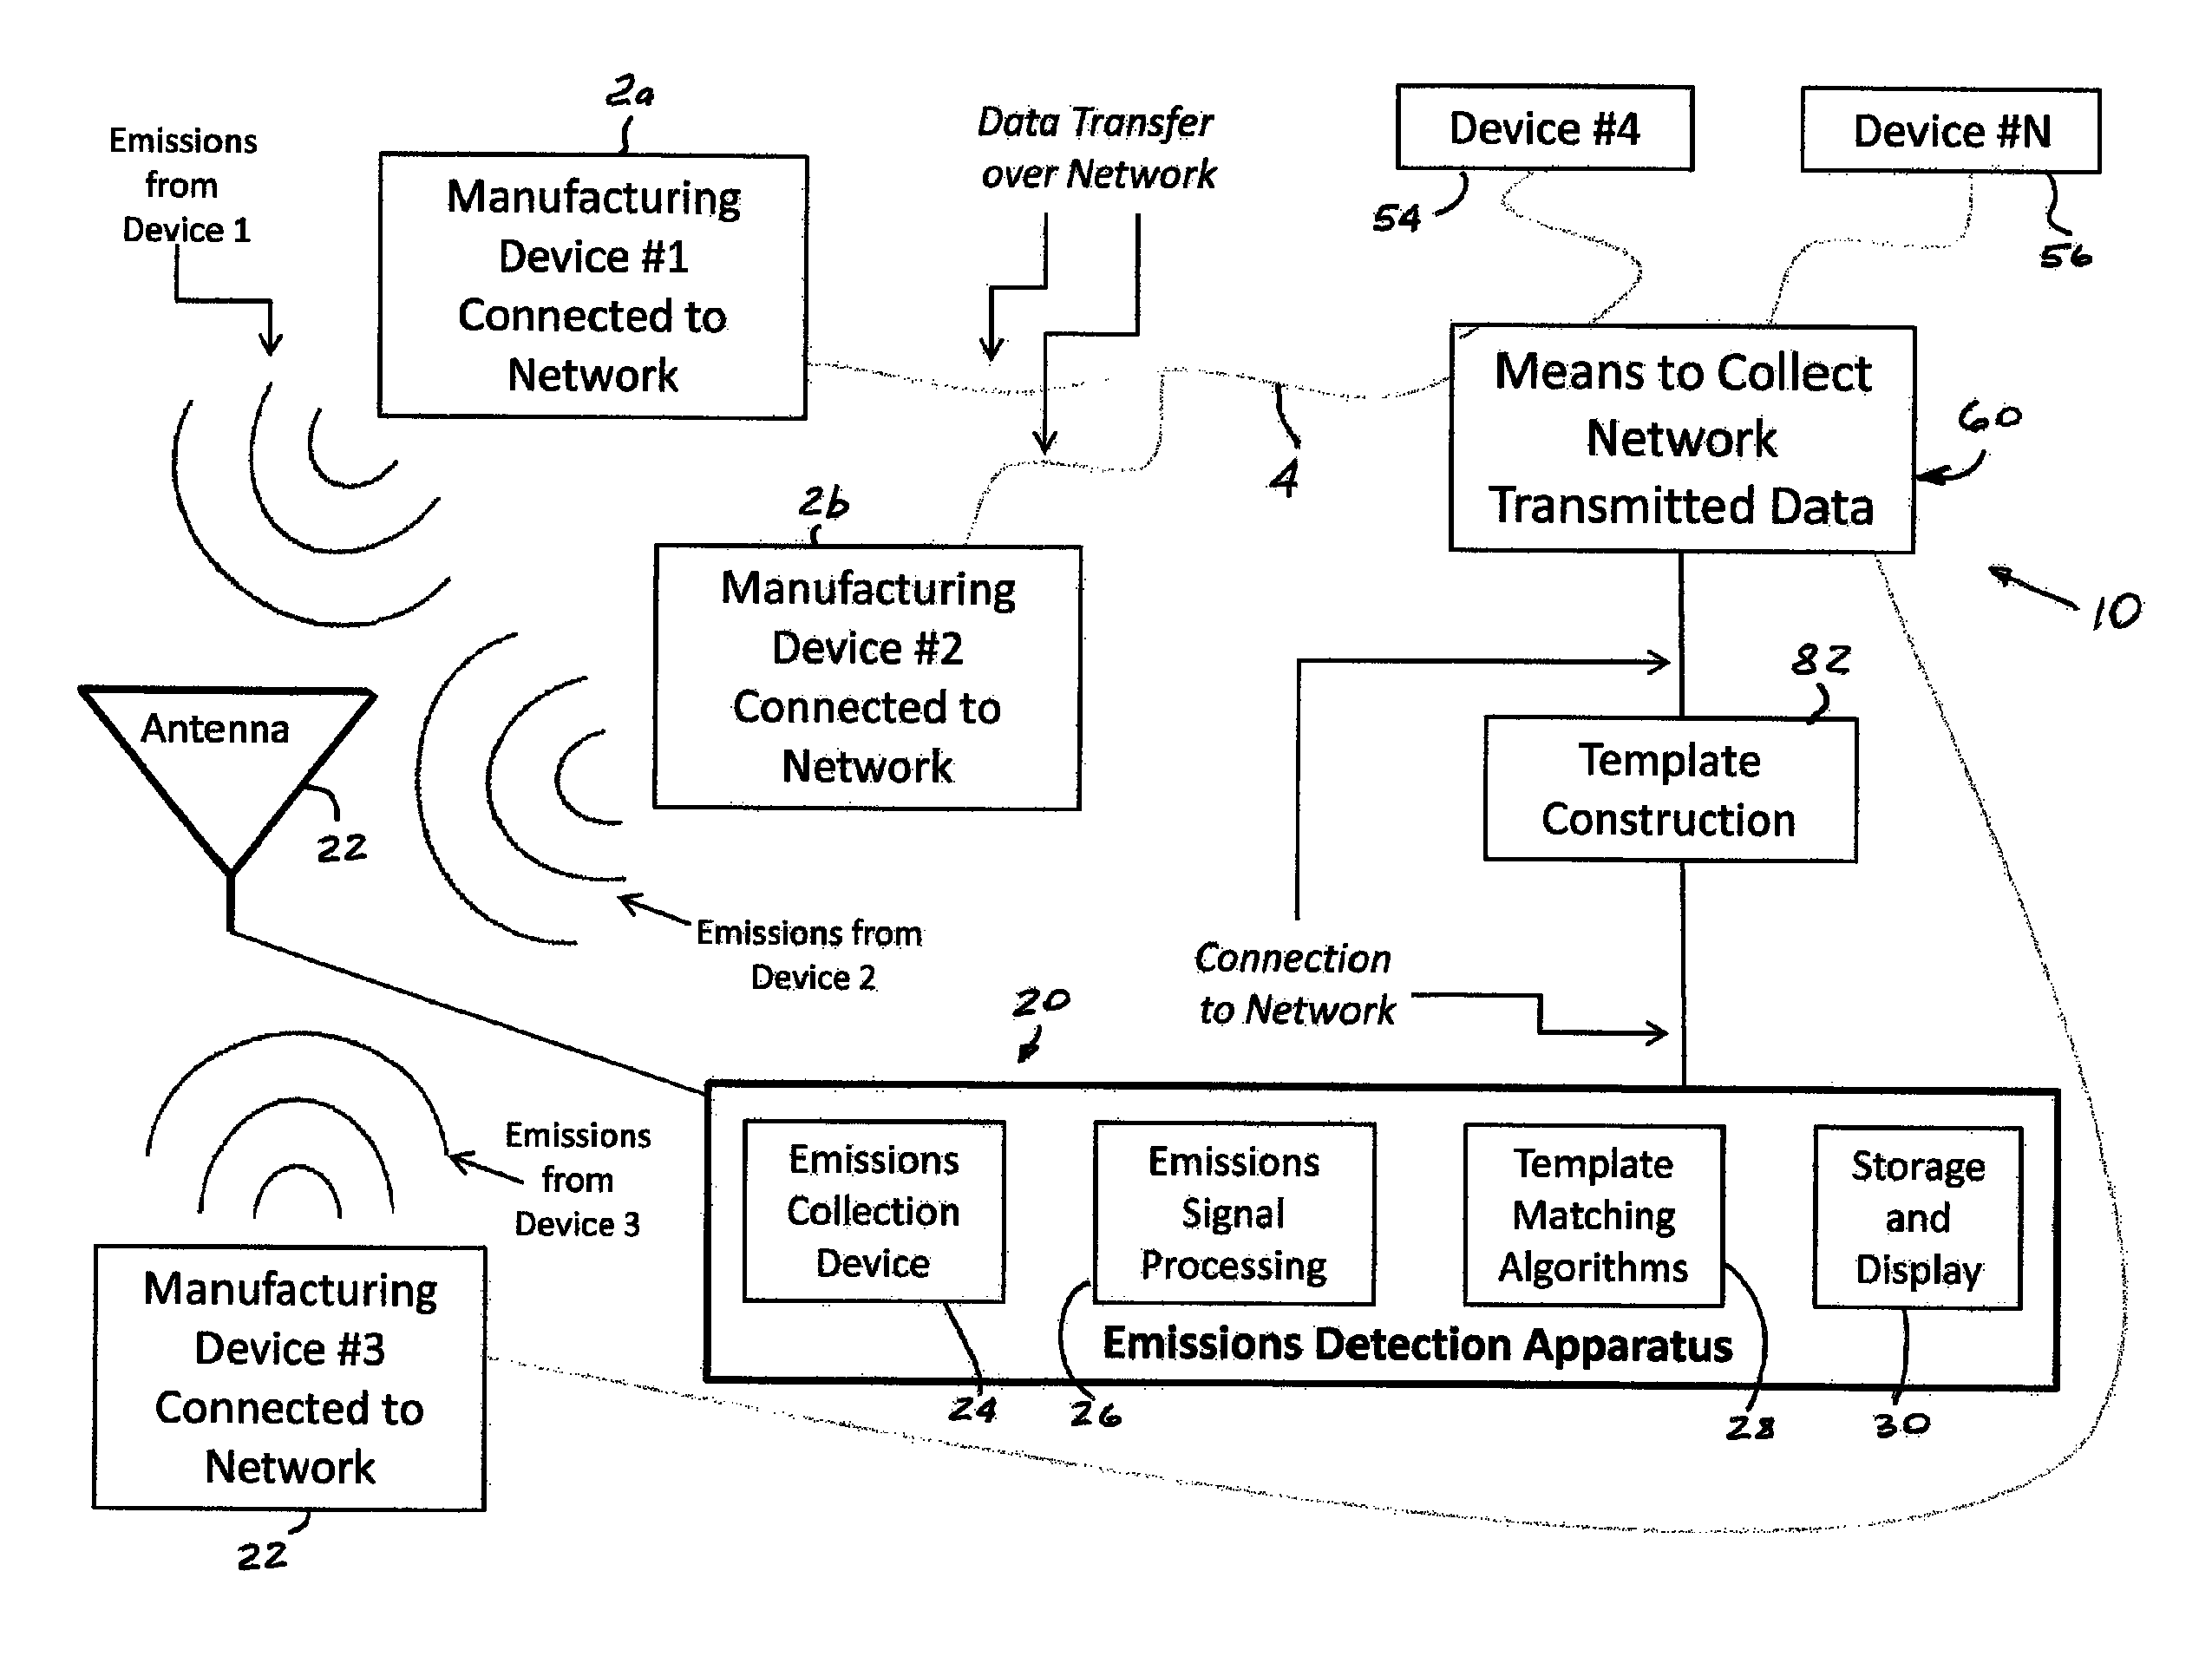 System and method for physically detecting, identifying, diagnosing and geolocating electronic devices connectable to a network